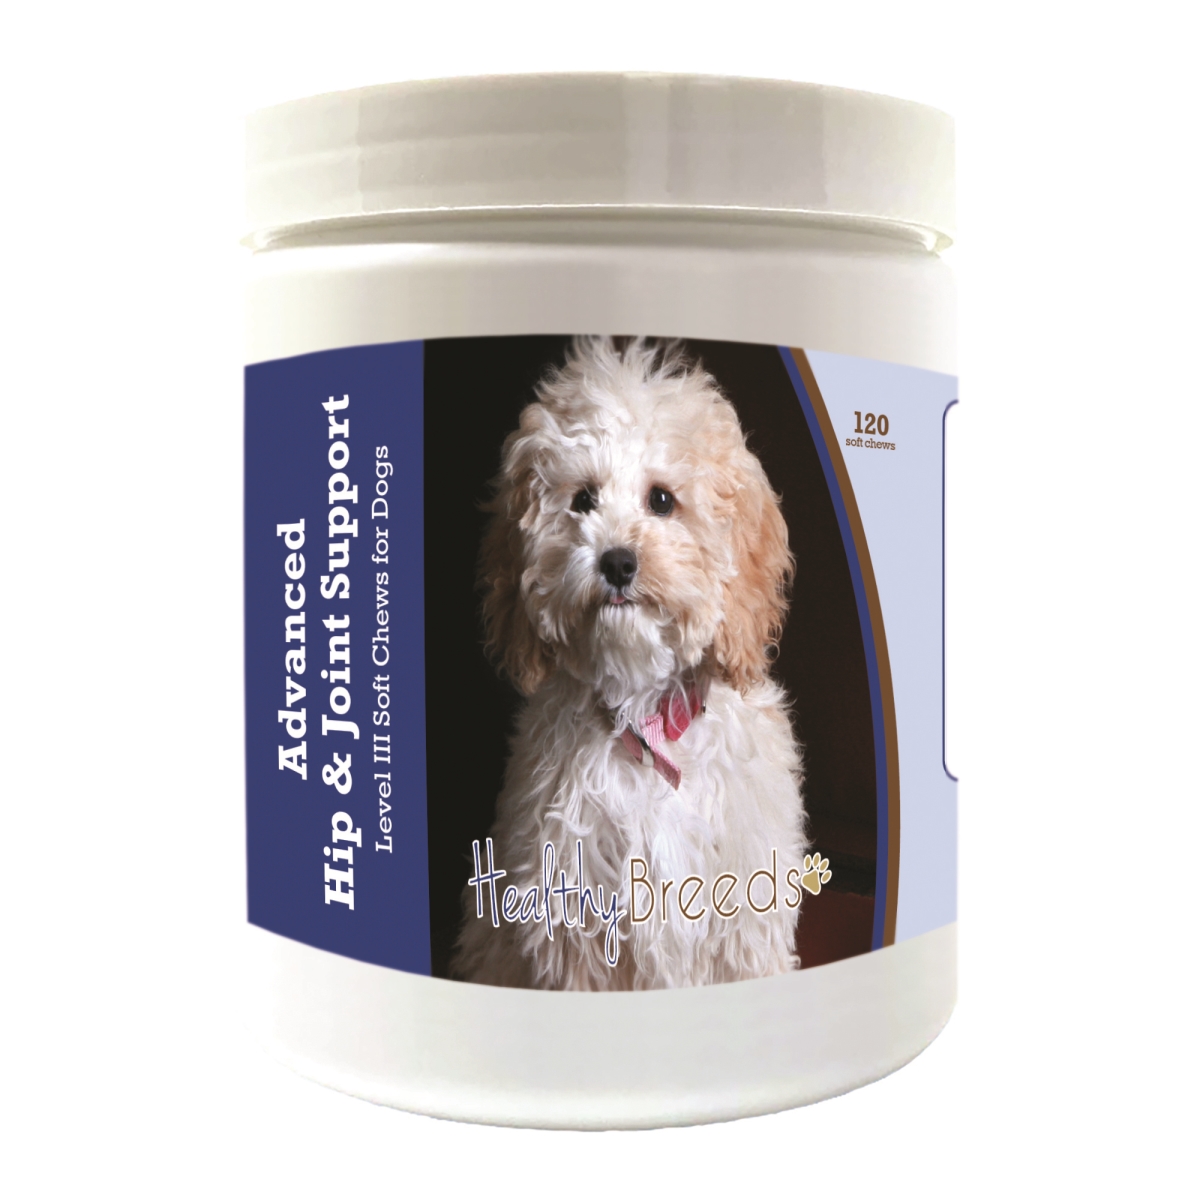 Picture of Healthy Breeds 192959897968 Cockapoo Advanced Hip & Joint Support Level III Soft Chews for Dogs